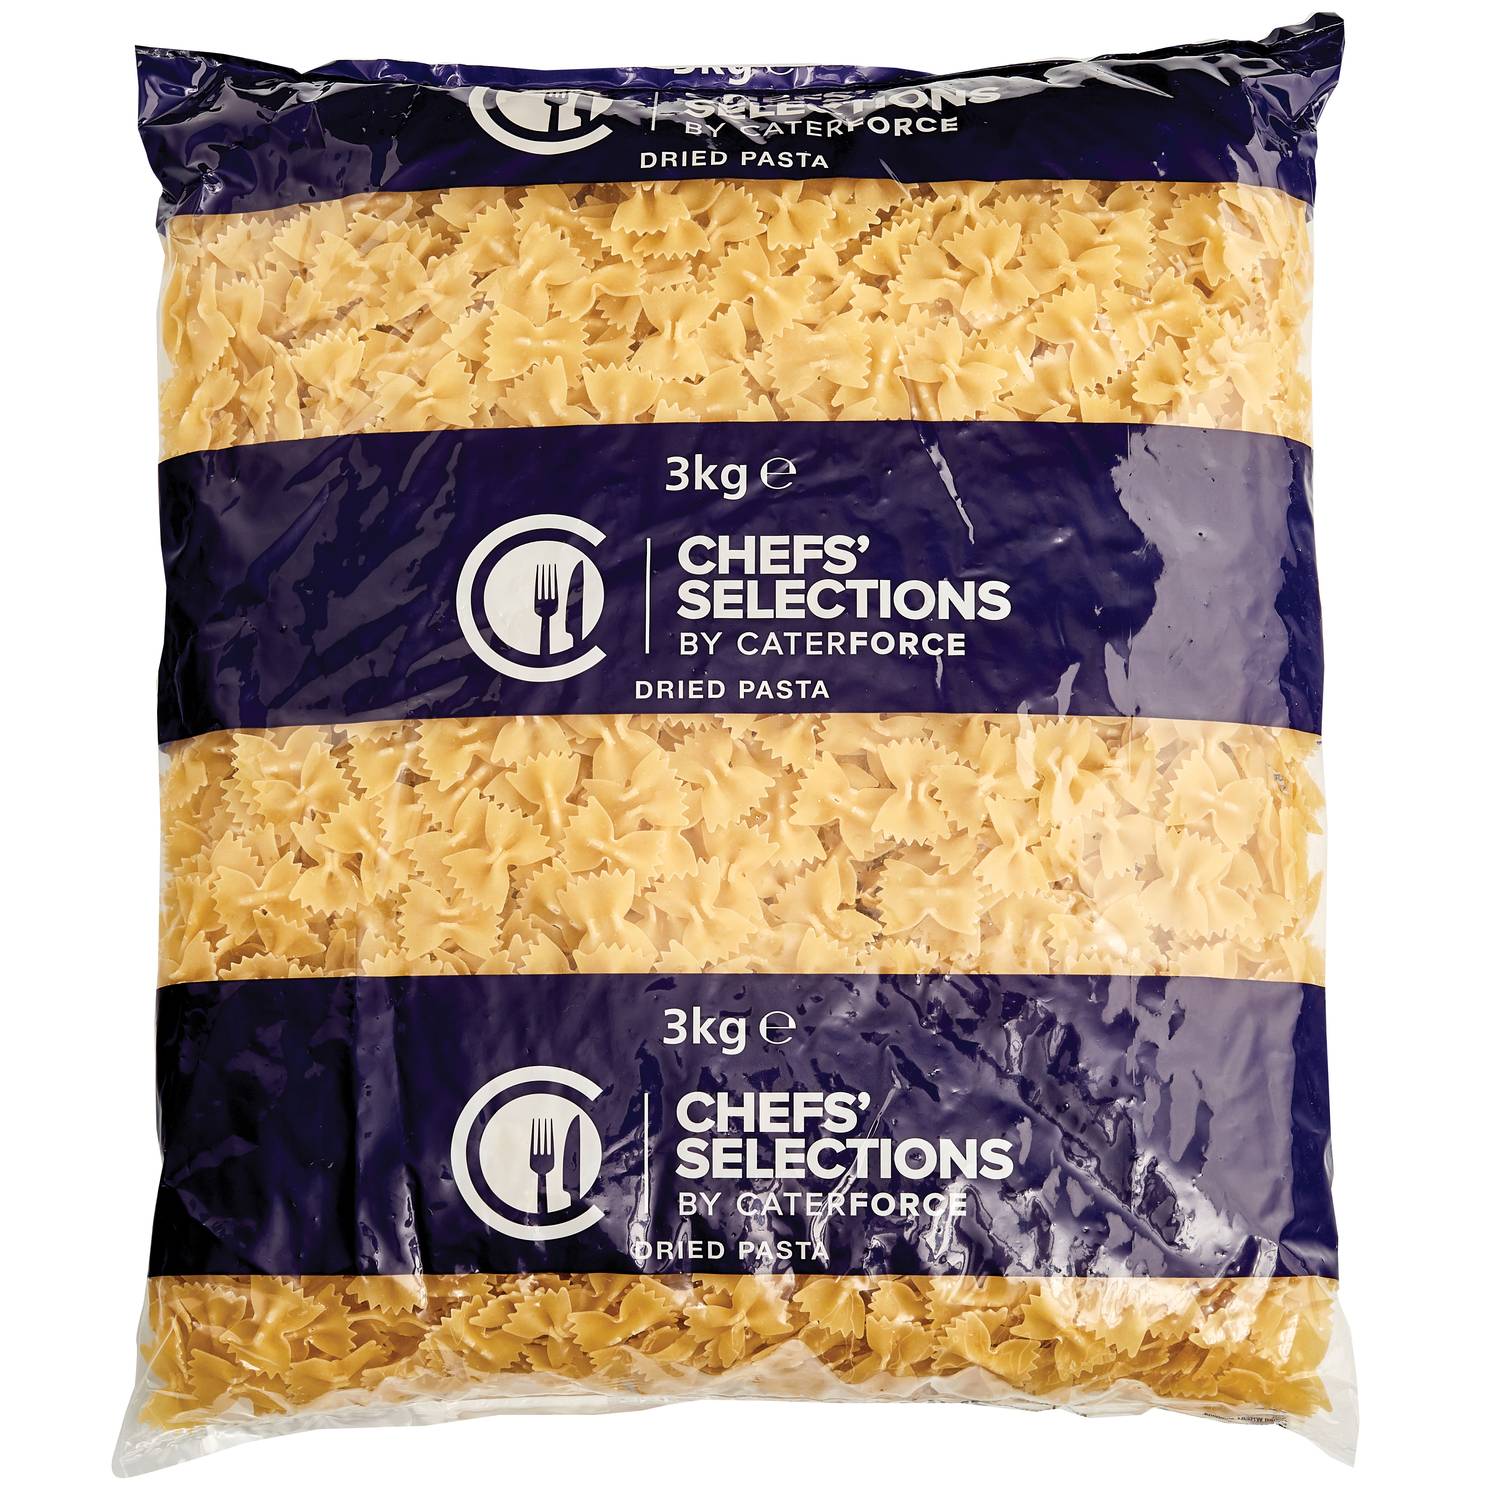 Chefs’ Selections Farfalle Pasta (4 x 3kg)